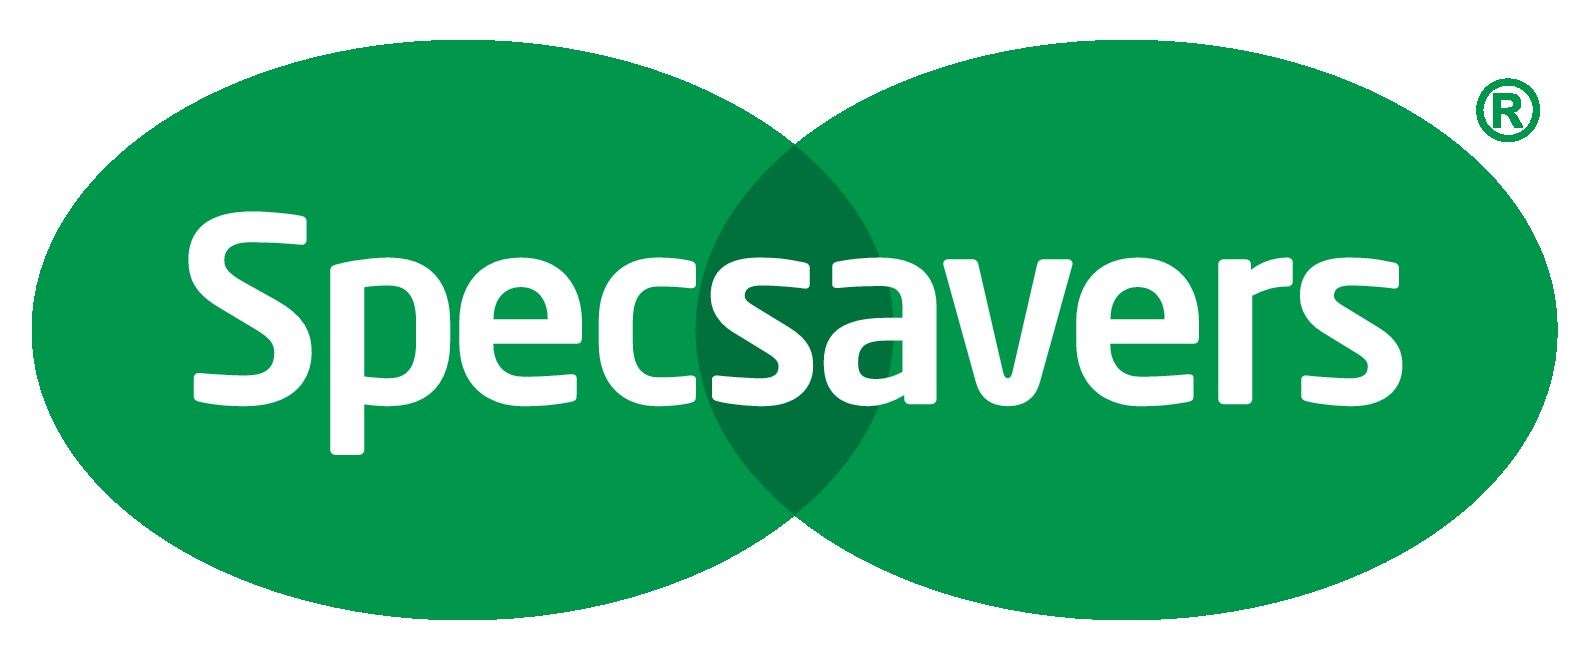 Specsavers is moving to Tenterden